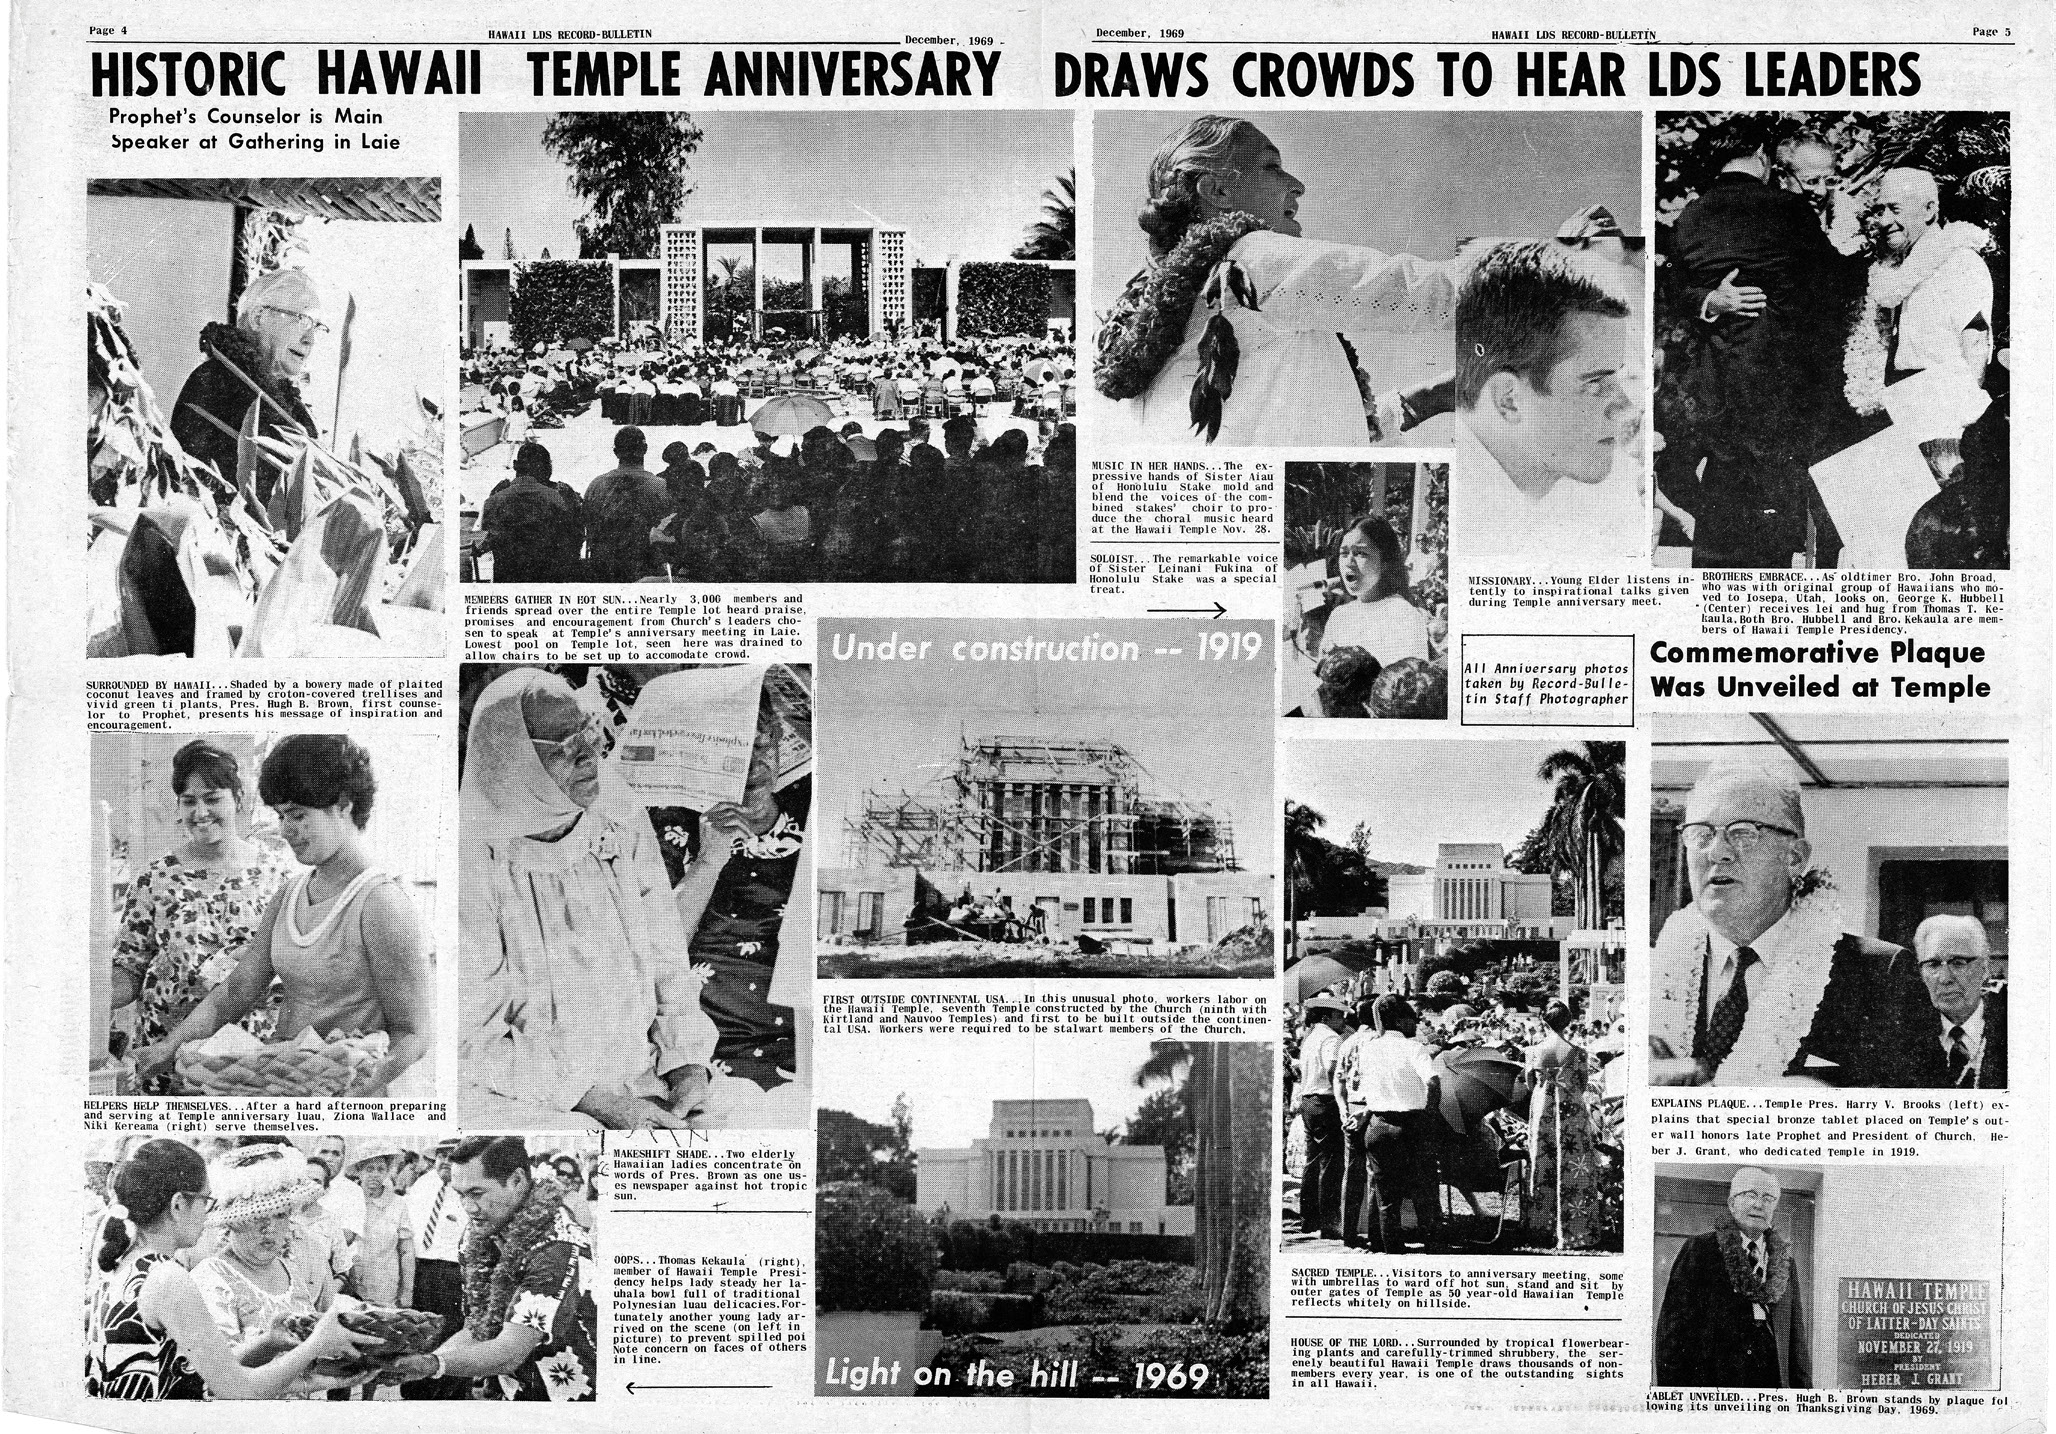 In celebration of the Hawaii Temple’s golden anniversary on Thanksgiving Day 1969, some 2,800 people gathered on the temple grounds to hear President Hugh B. Brown, First Counselor in the First Presidency, deliver the keynote address. Courtesy of BYU-Hawaii Archives.